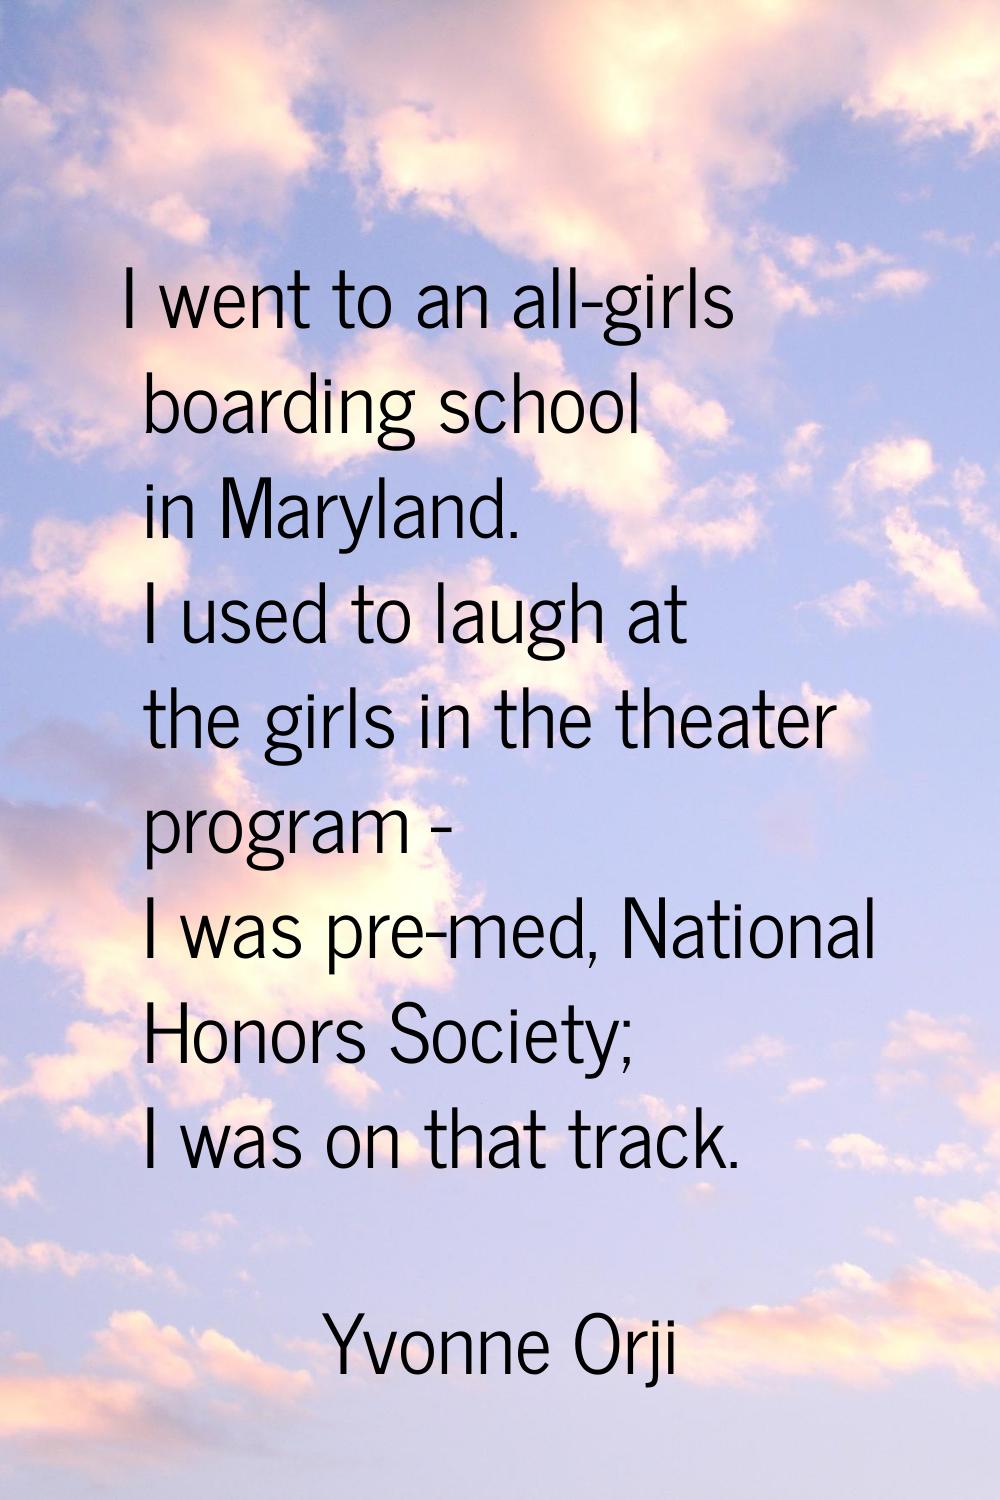 I went to an all-girls boarding school in Maryland. I used to laugh at the girls in the theater pro